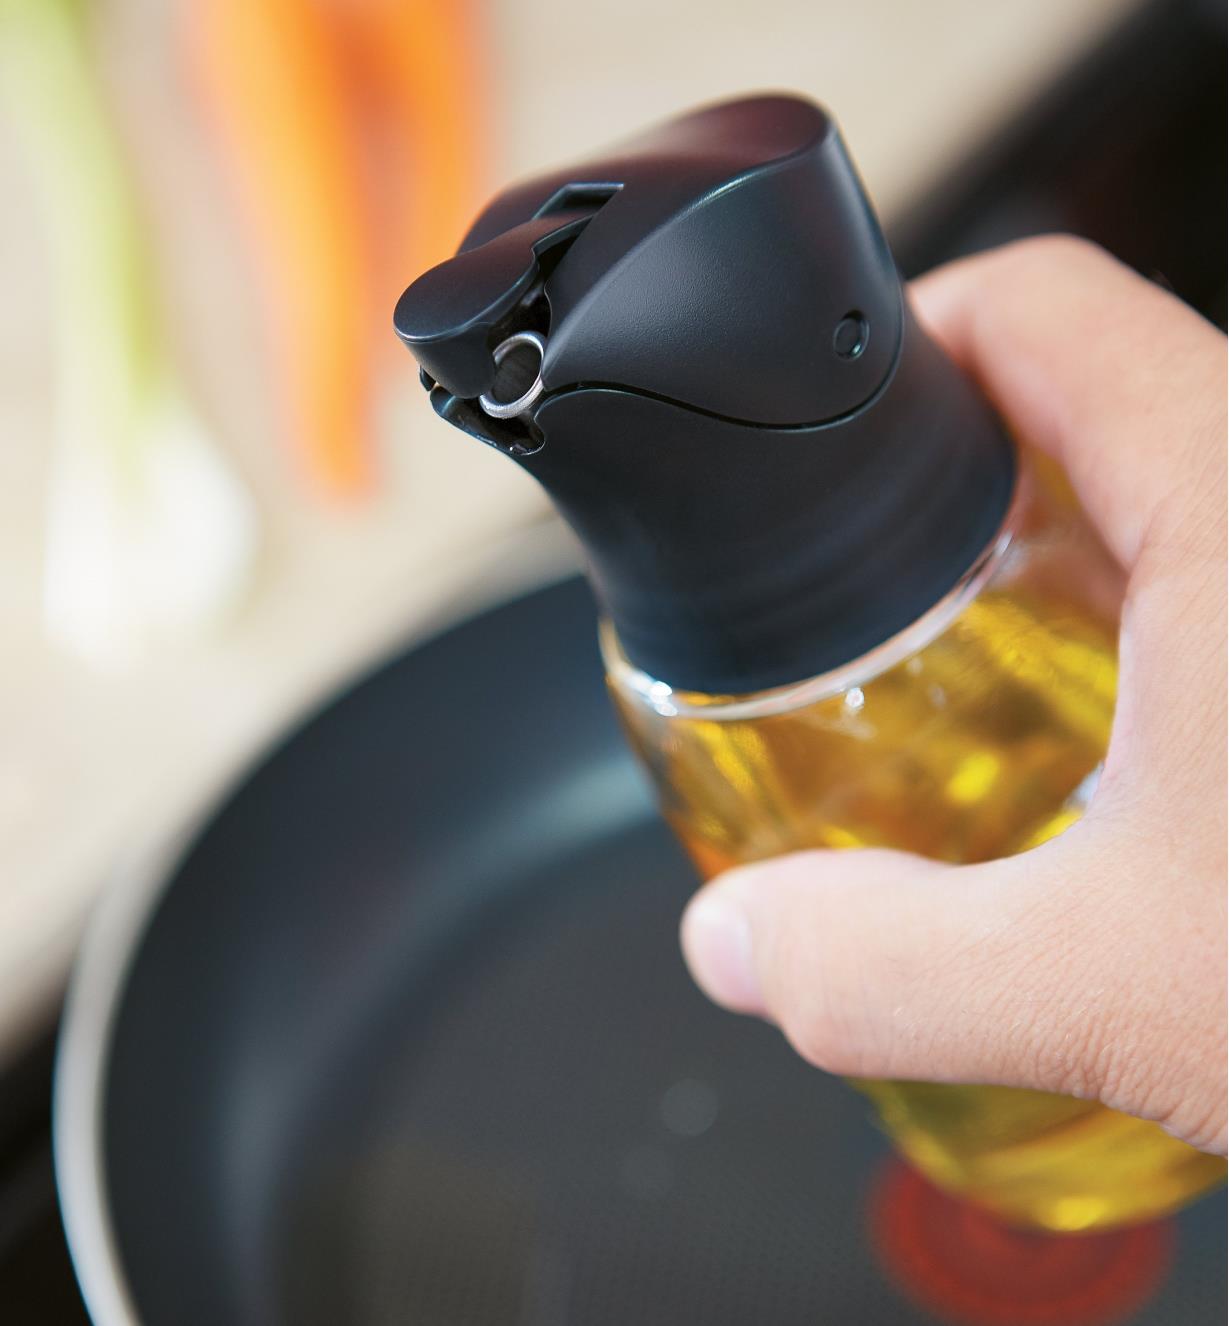 Flip cap opening as bottle is tilted to pour oil into a frying pan